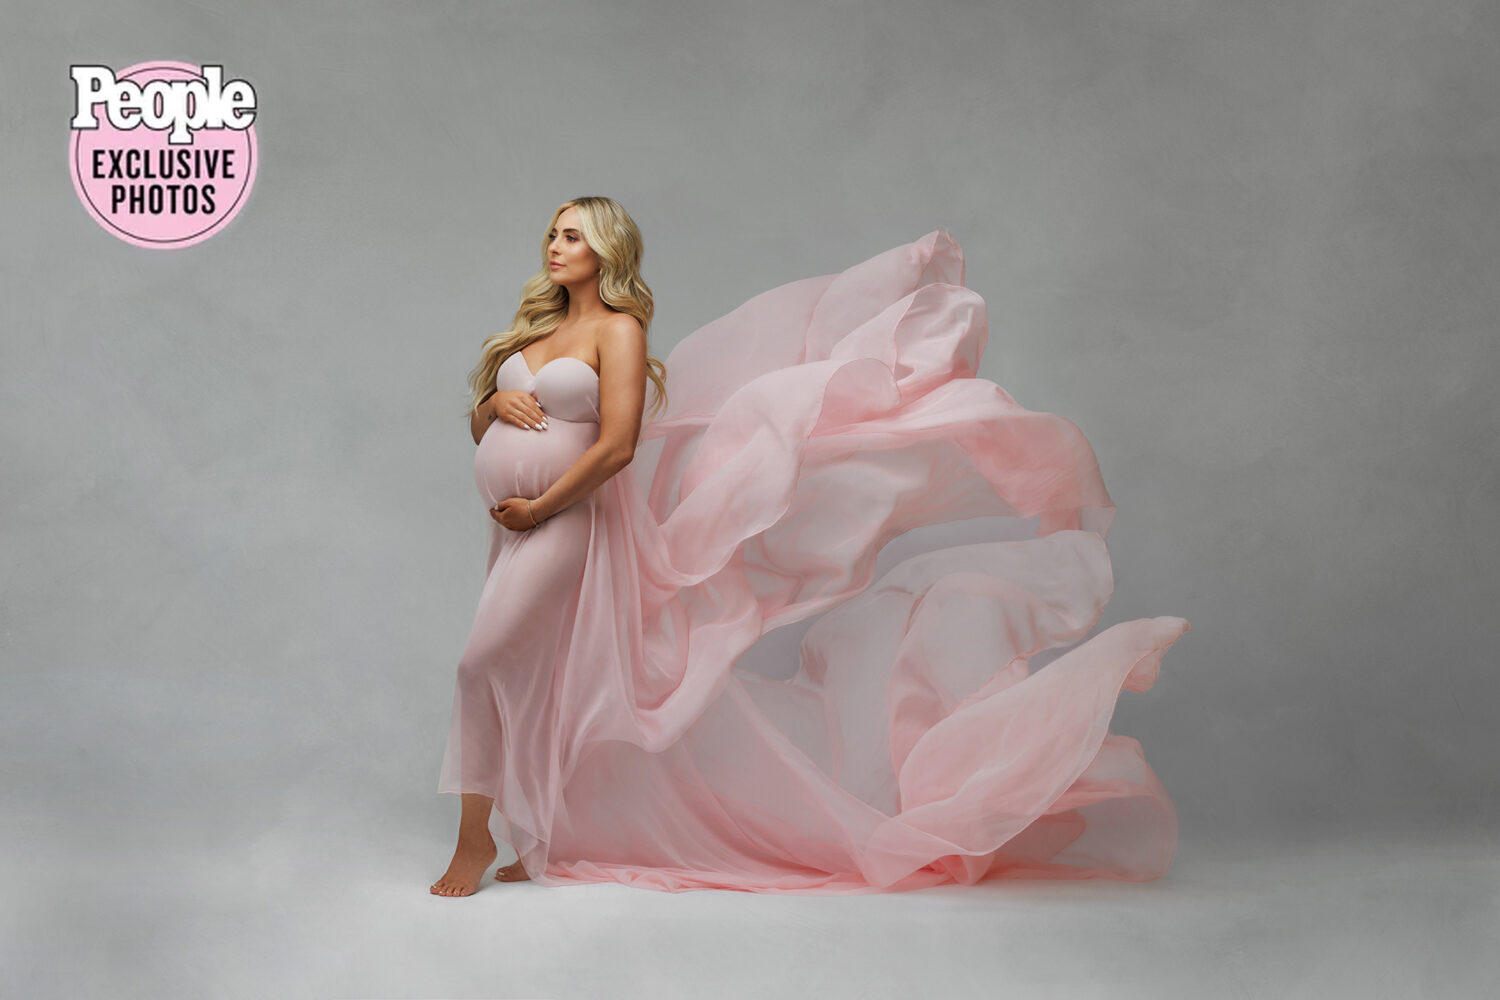 PEOPLE Magazine Exclusive feature – Pregnant Olympic Gymnast MyKayla Skinner Poses for Maternity Photos: ‘Can’t Wait’